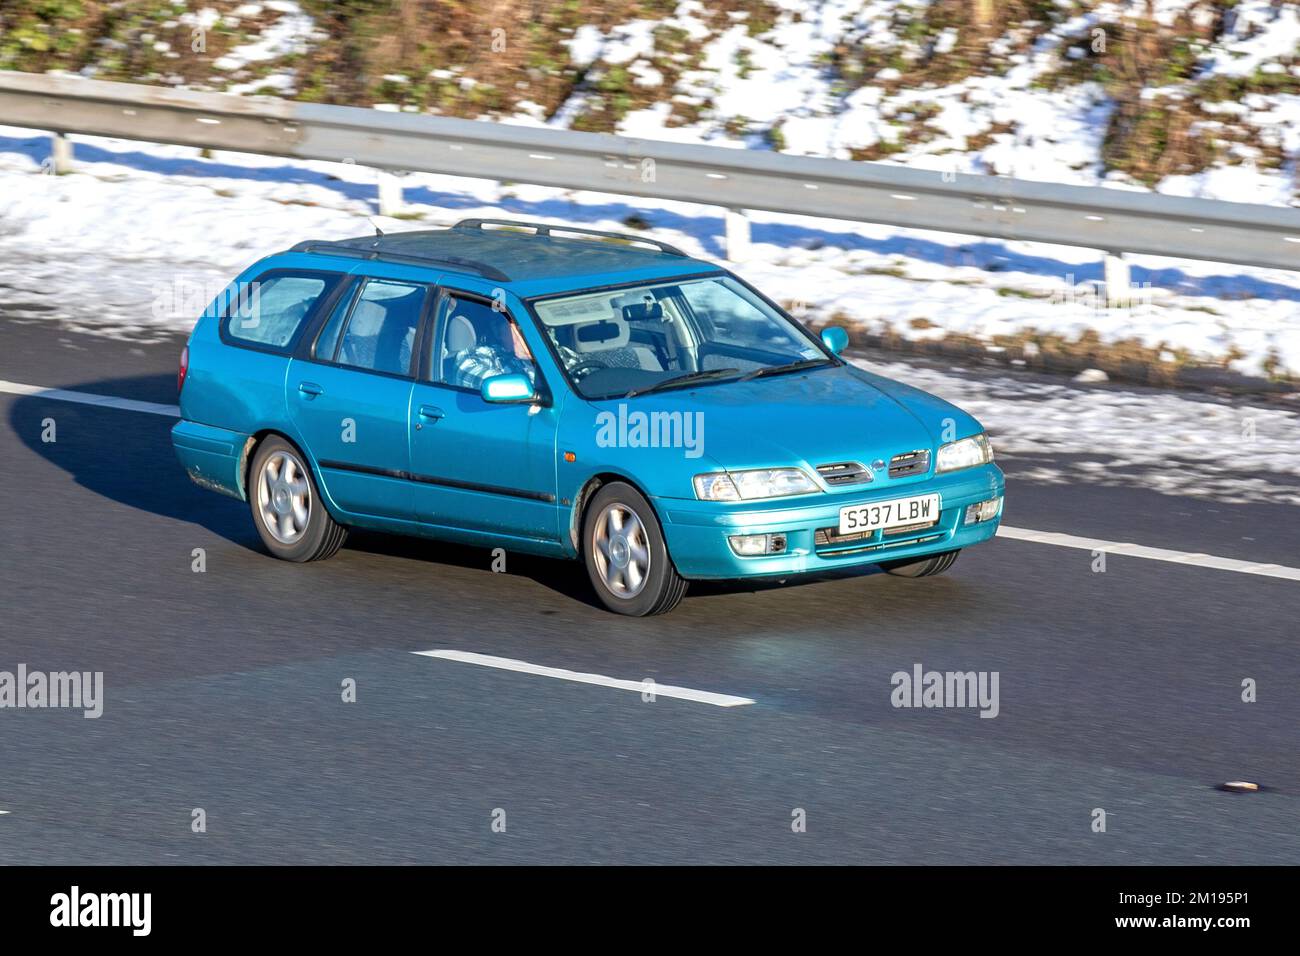 1998 90s nineties Blue NISSAN PRIMERA SE Estate 16V1998cc Petrol; Frosted cars on a cold winter morning. Wintertime low temperatures with December frost and cold driving conditions on the M61 motorway, UK Stock Photo